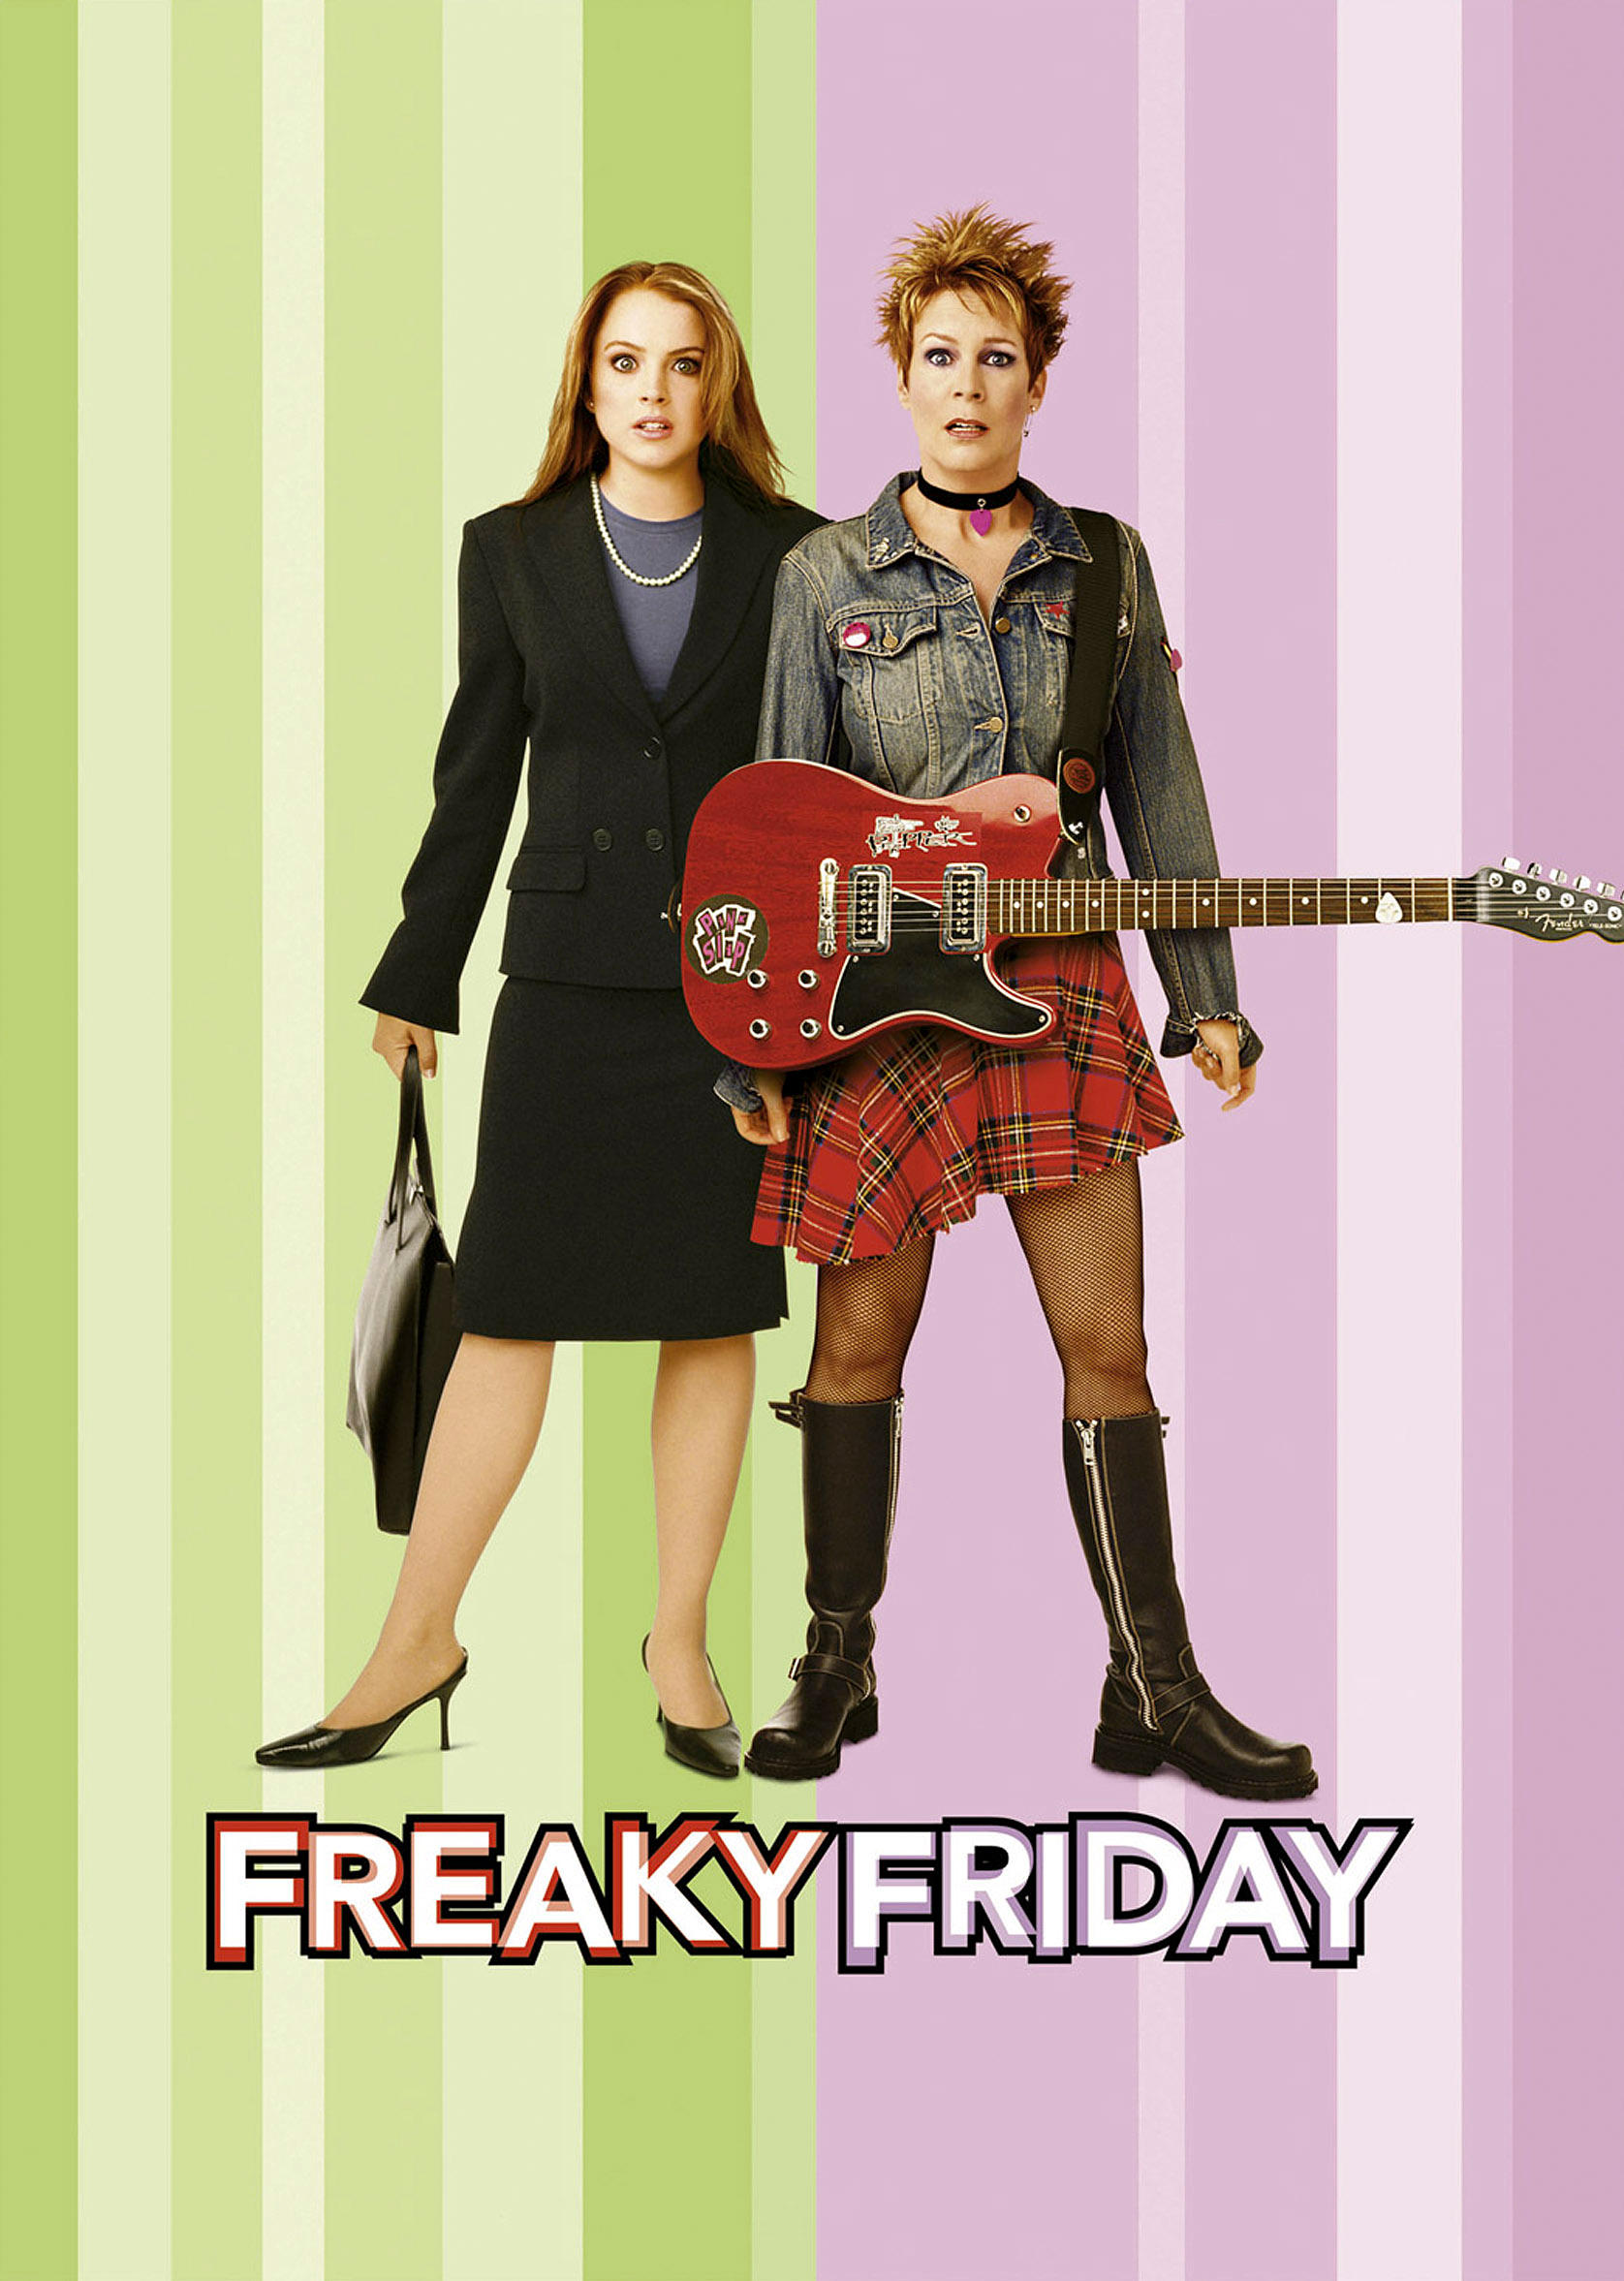 Freaky Friday movie poster